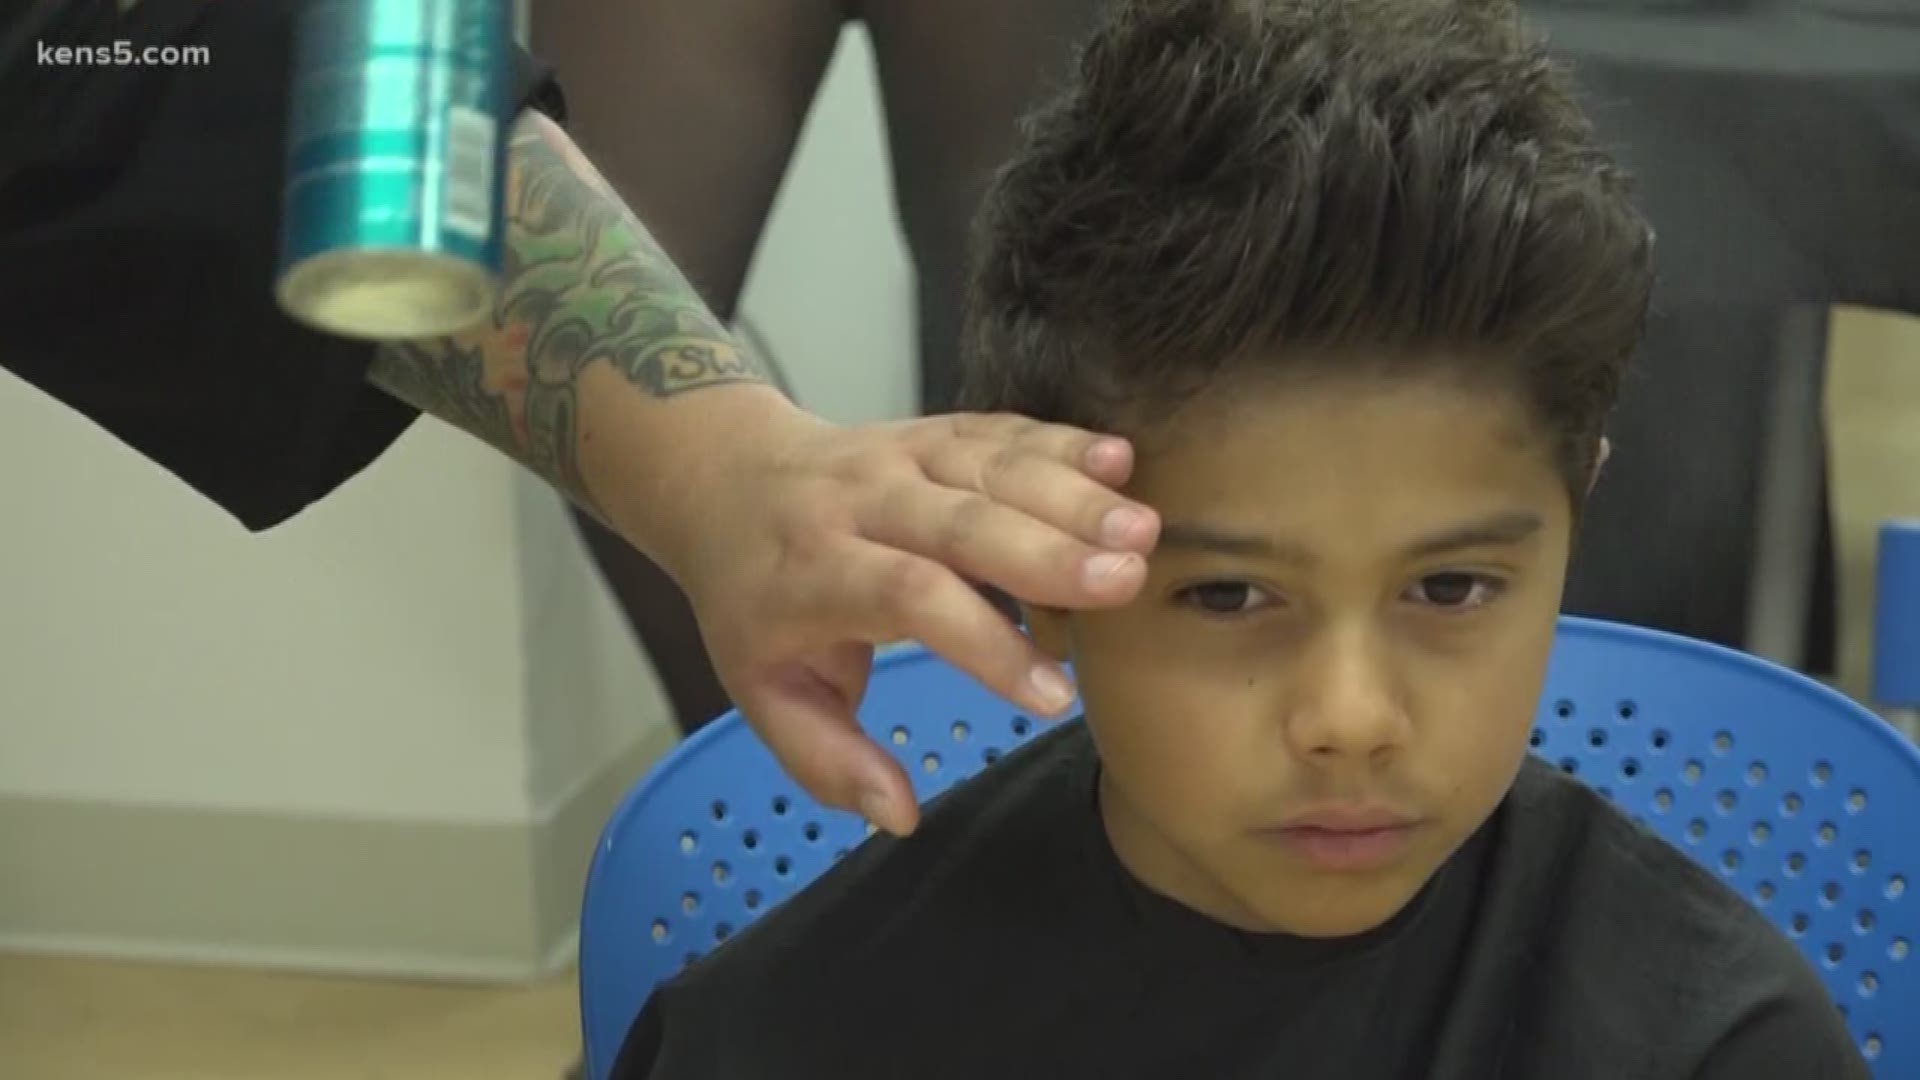 The Children's Hospital of San Antonio partnered with Kidd's Kids and Toni & Guy to provide young patients with some positive memories and a sense of empowerment.